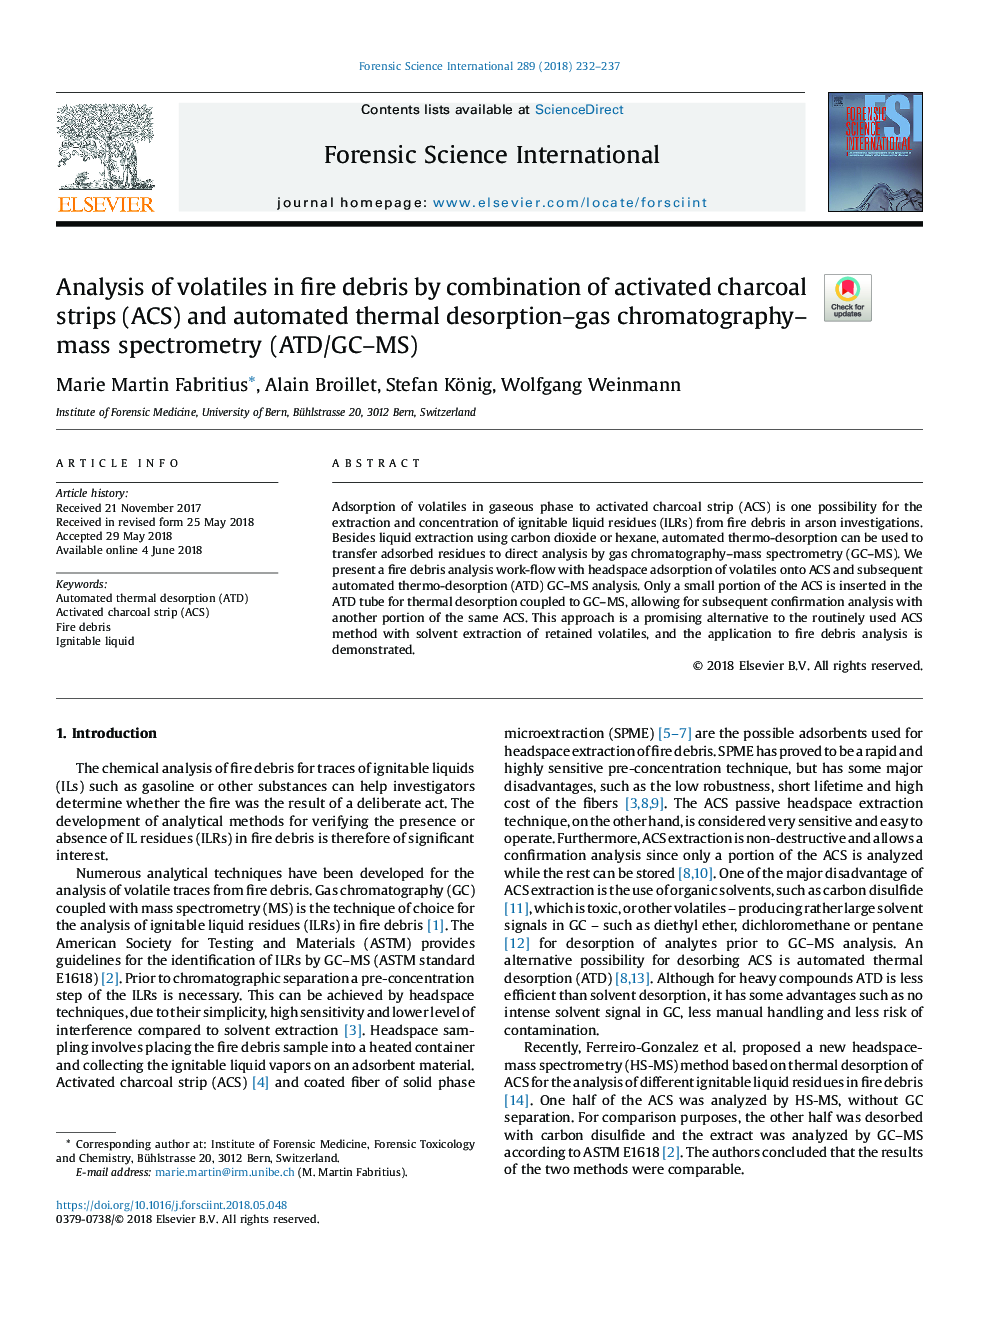 Analysis of volatiles in fire debris by combination of activated charcoal strips (ACS) and automated thermal desorption-gas chromatography-mass spectrometry (ATD/GC-MS)